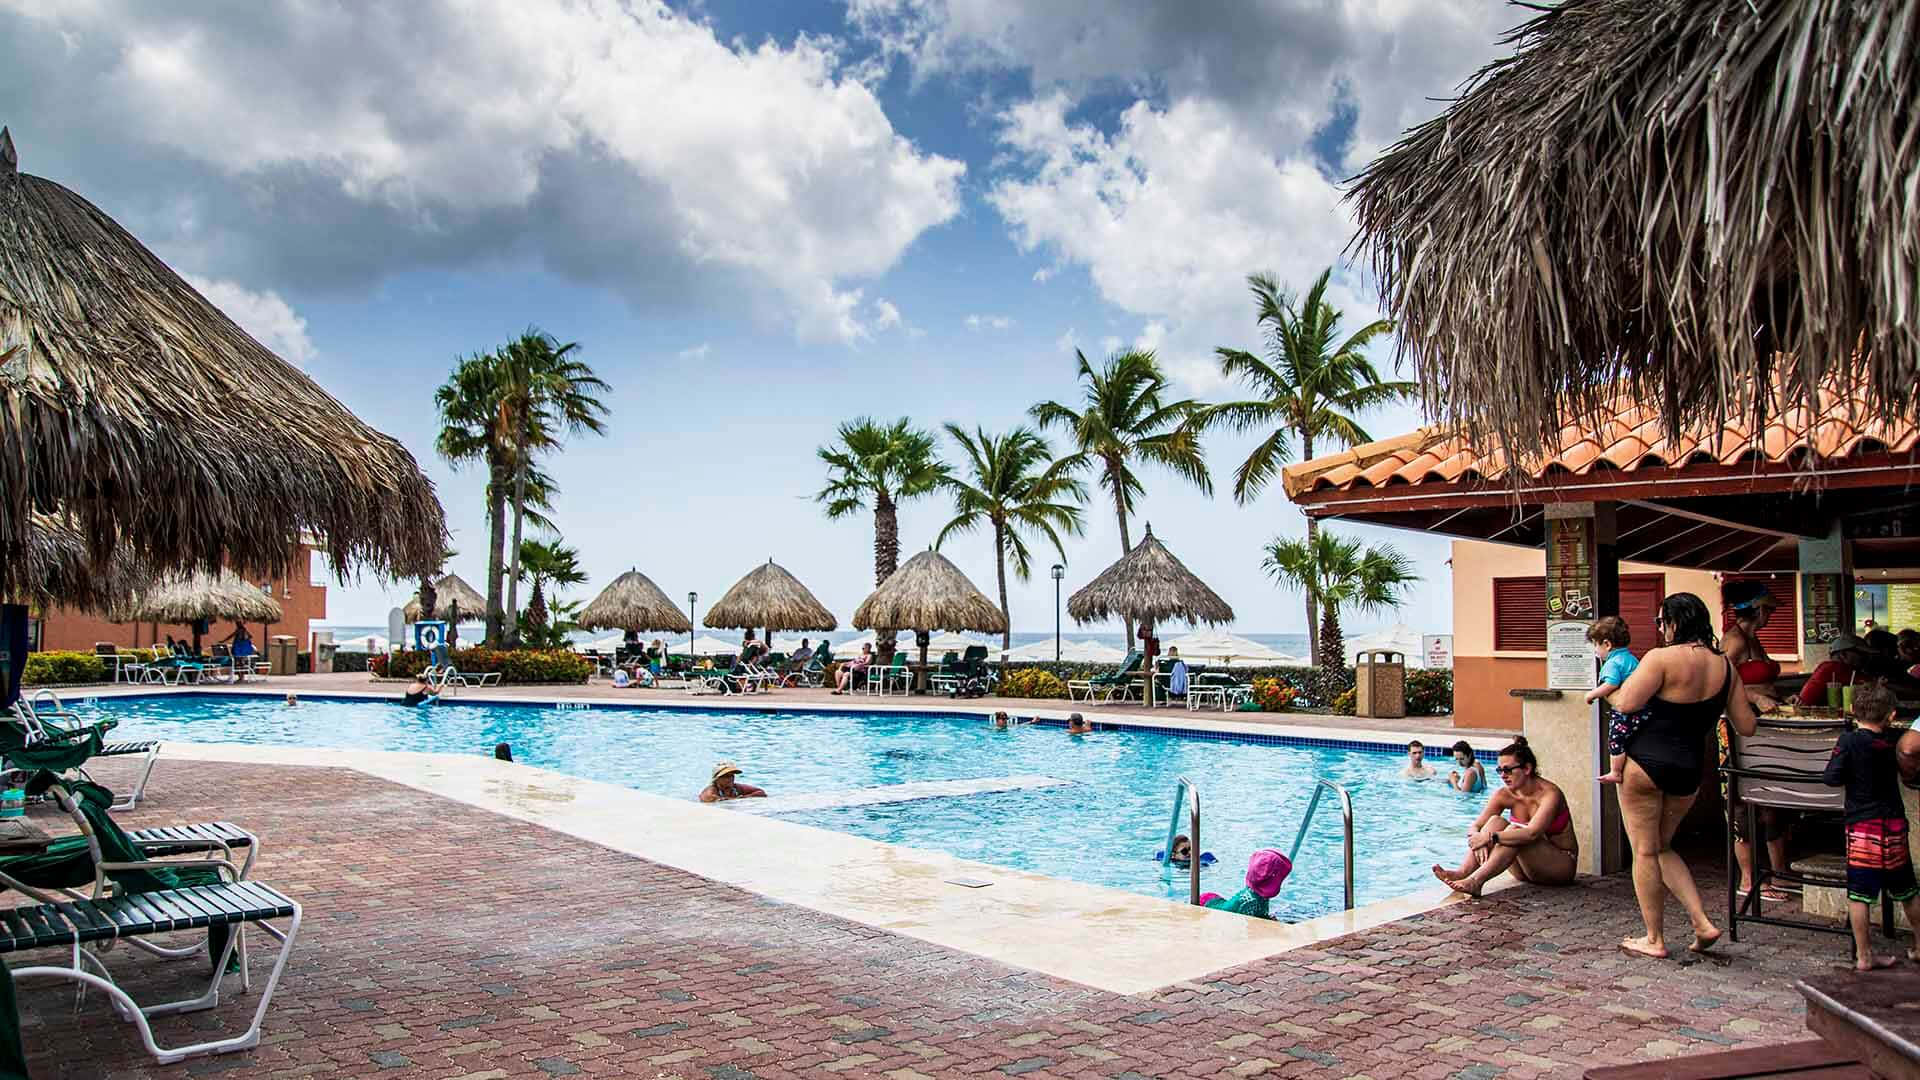 Aruba Beach And Swimming Pool Pictures